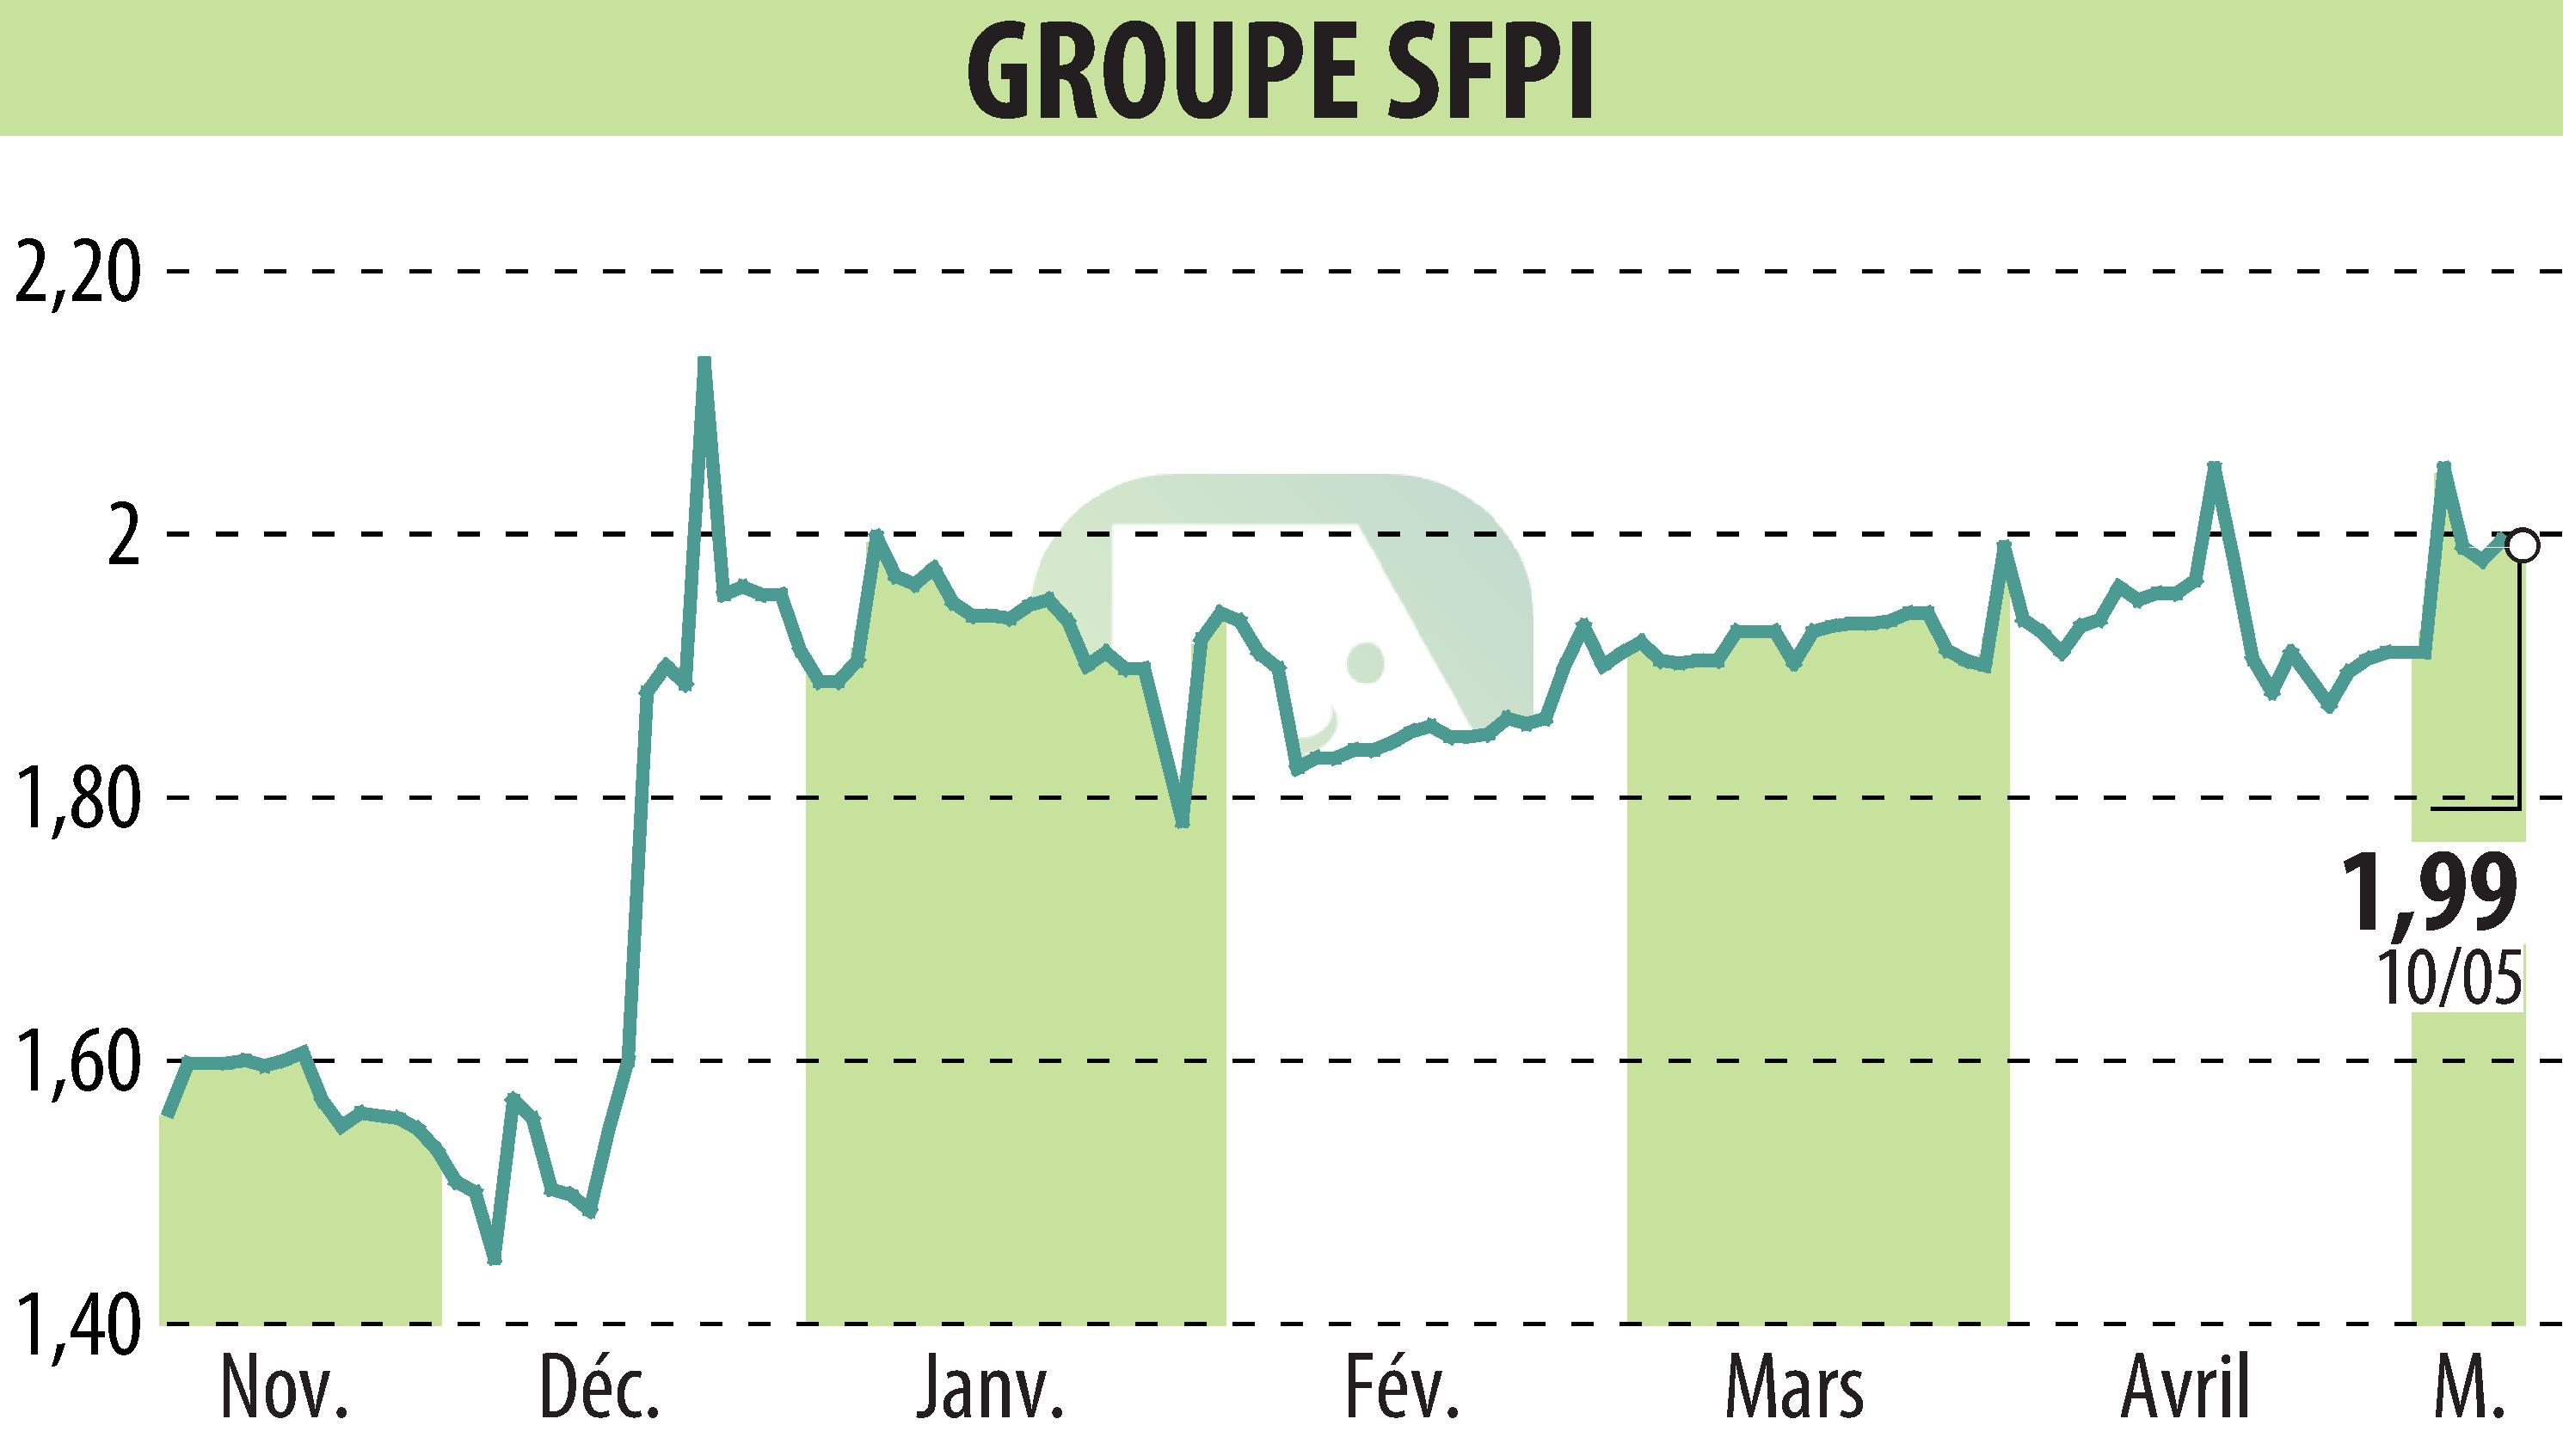 Stock price chart of GROUPE SFPI (EPA:SFPI) showing fluctuations.